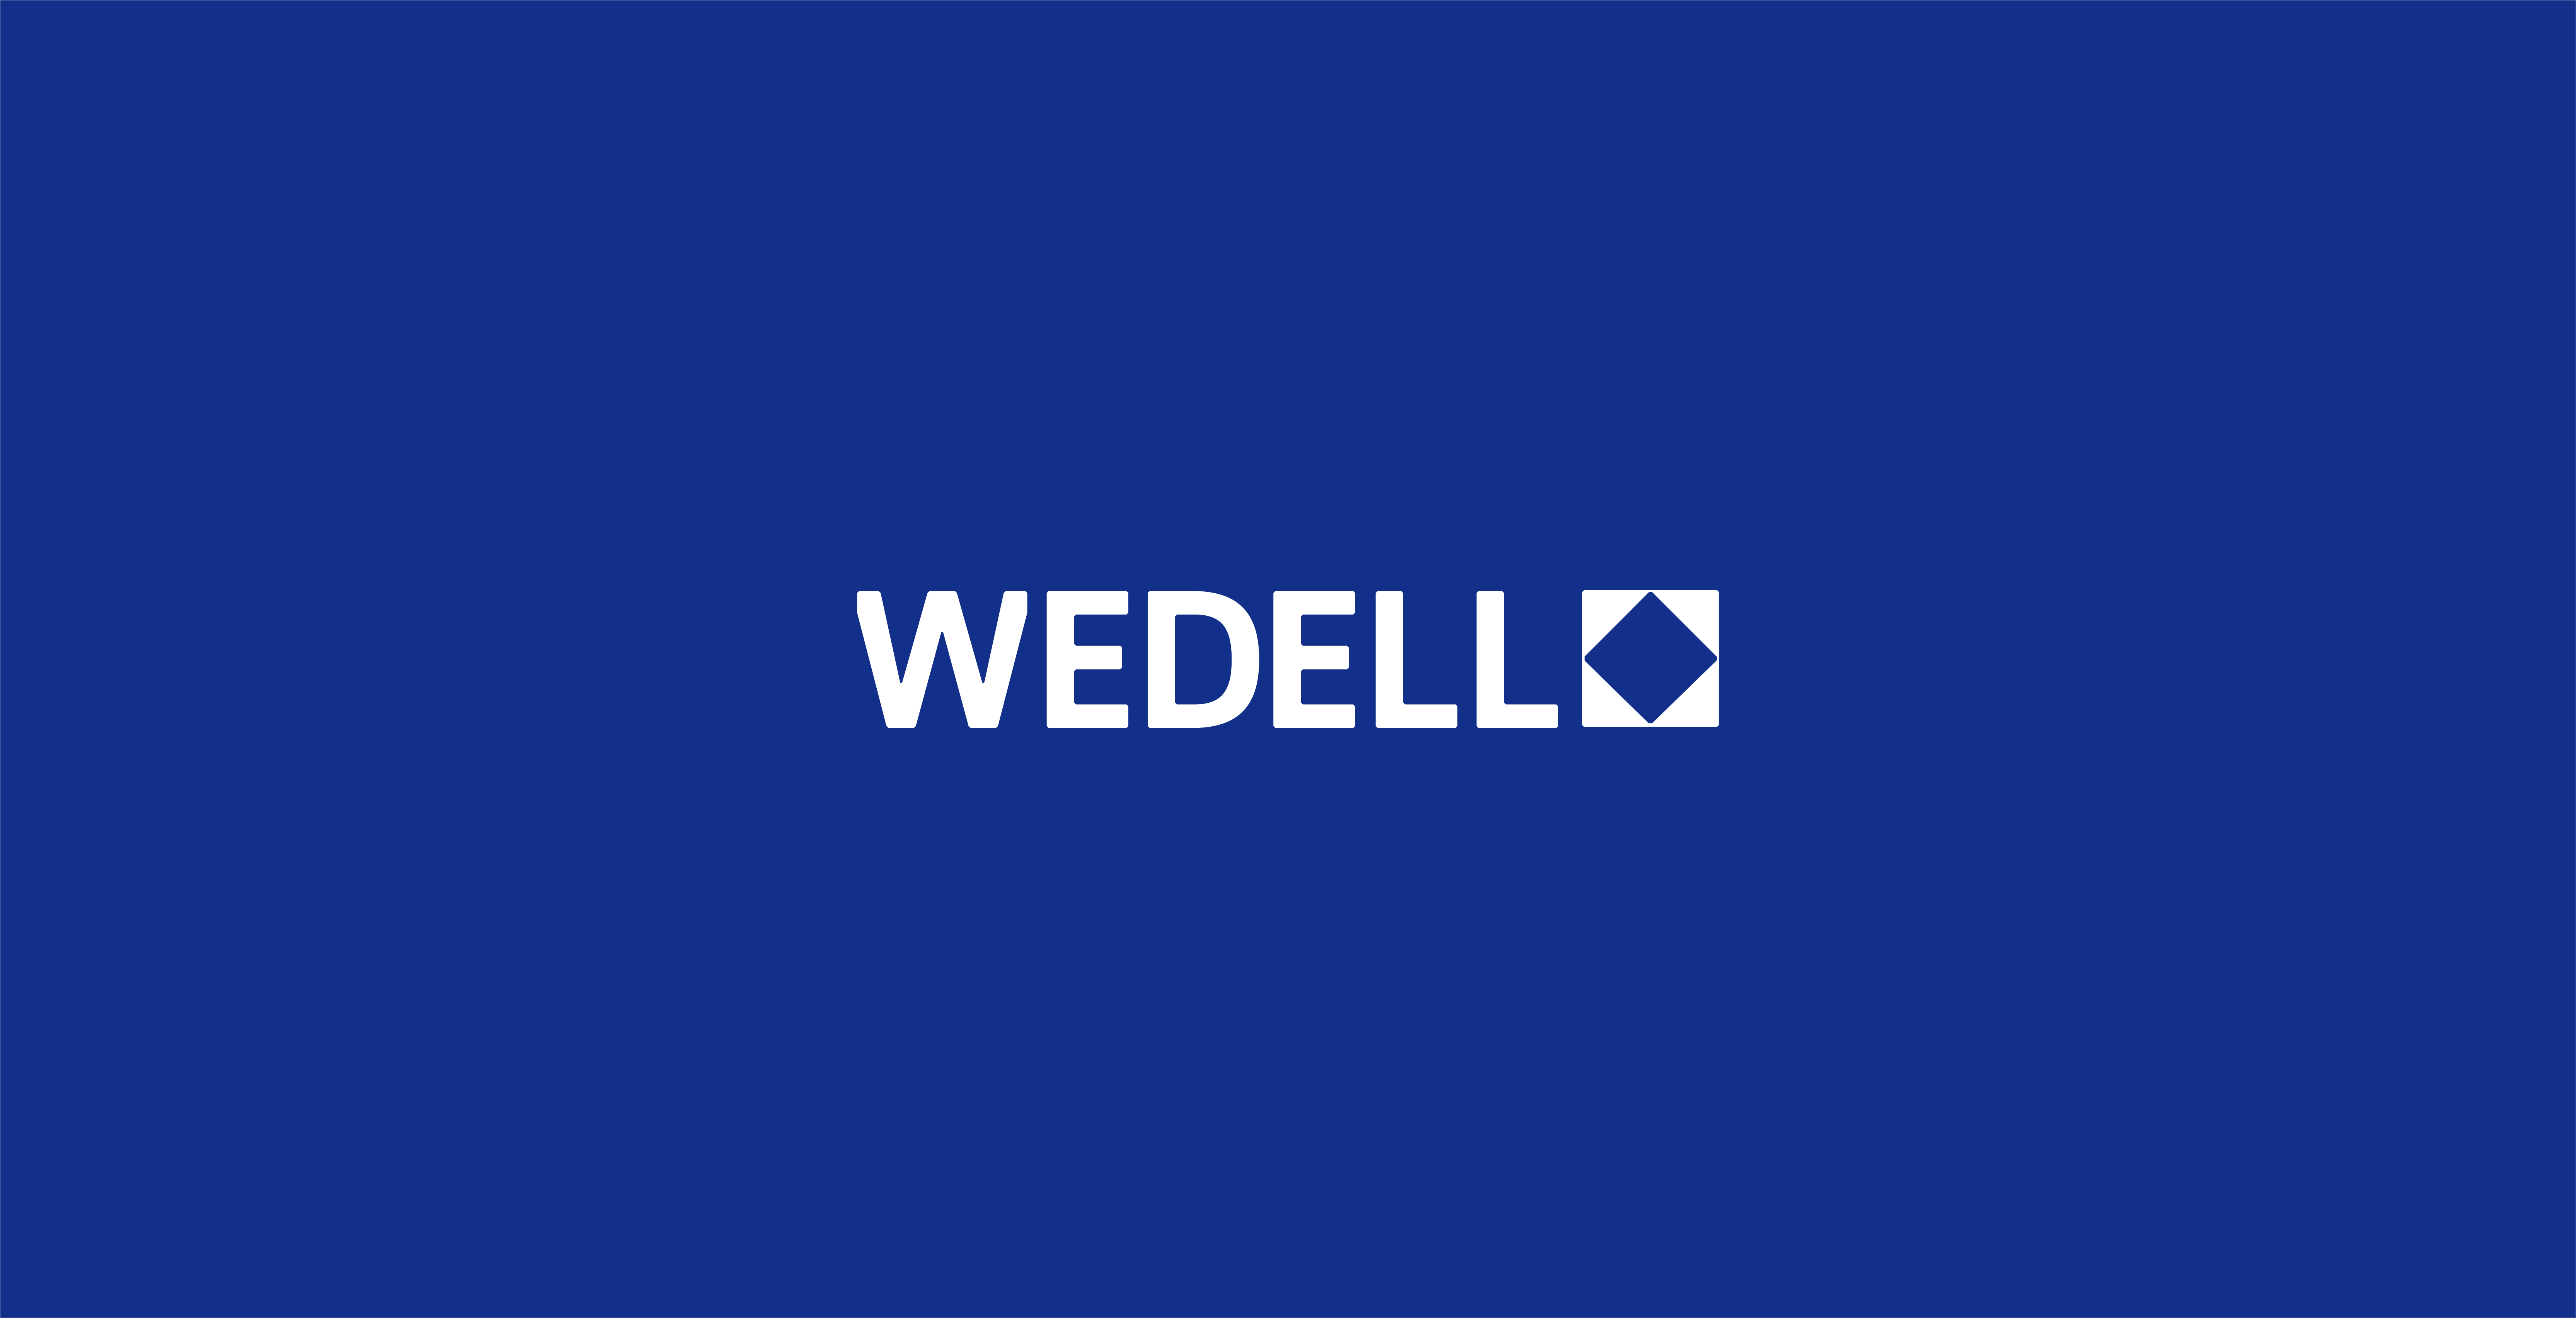 Wedell 